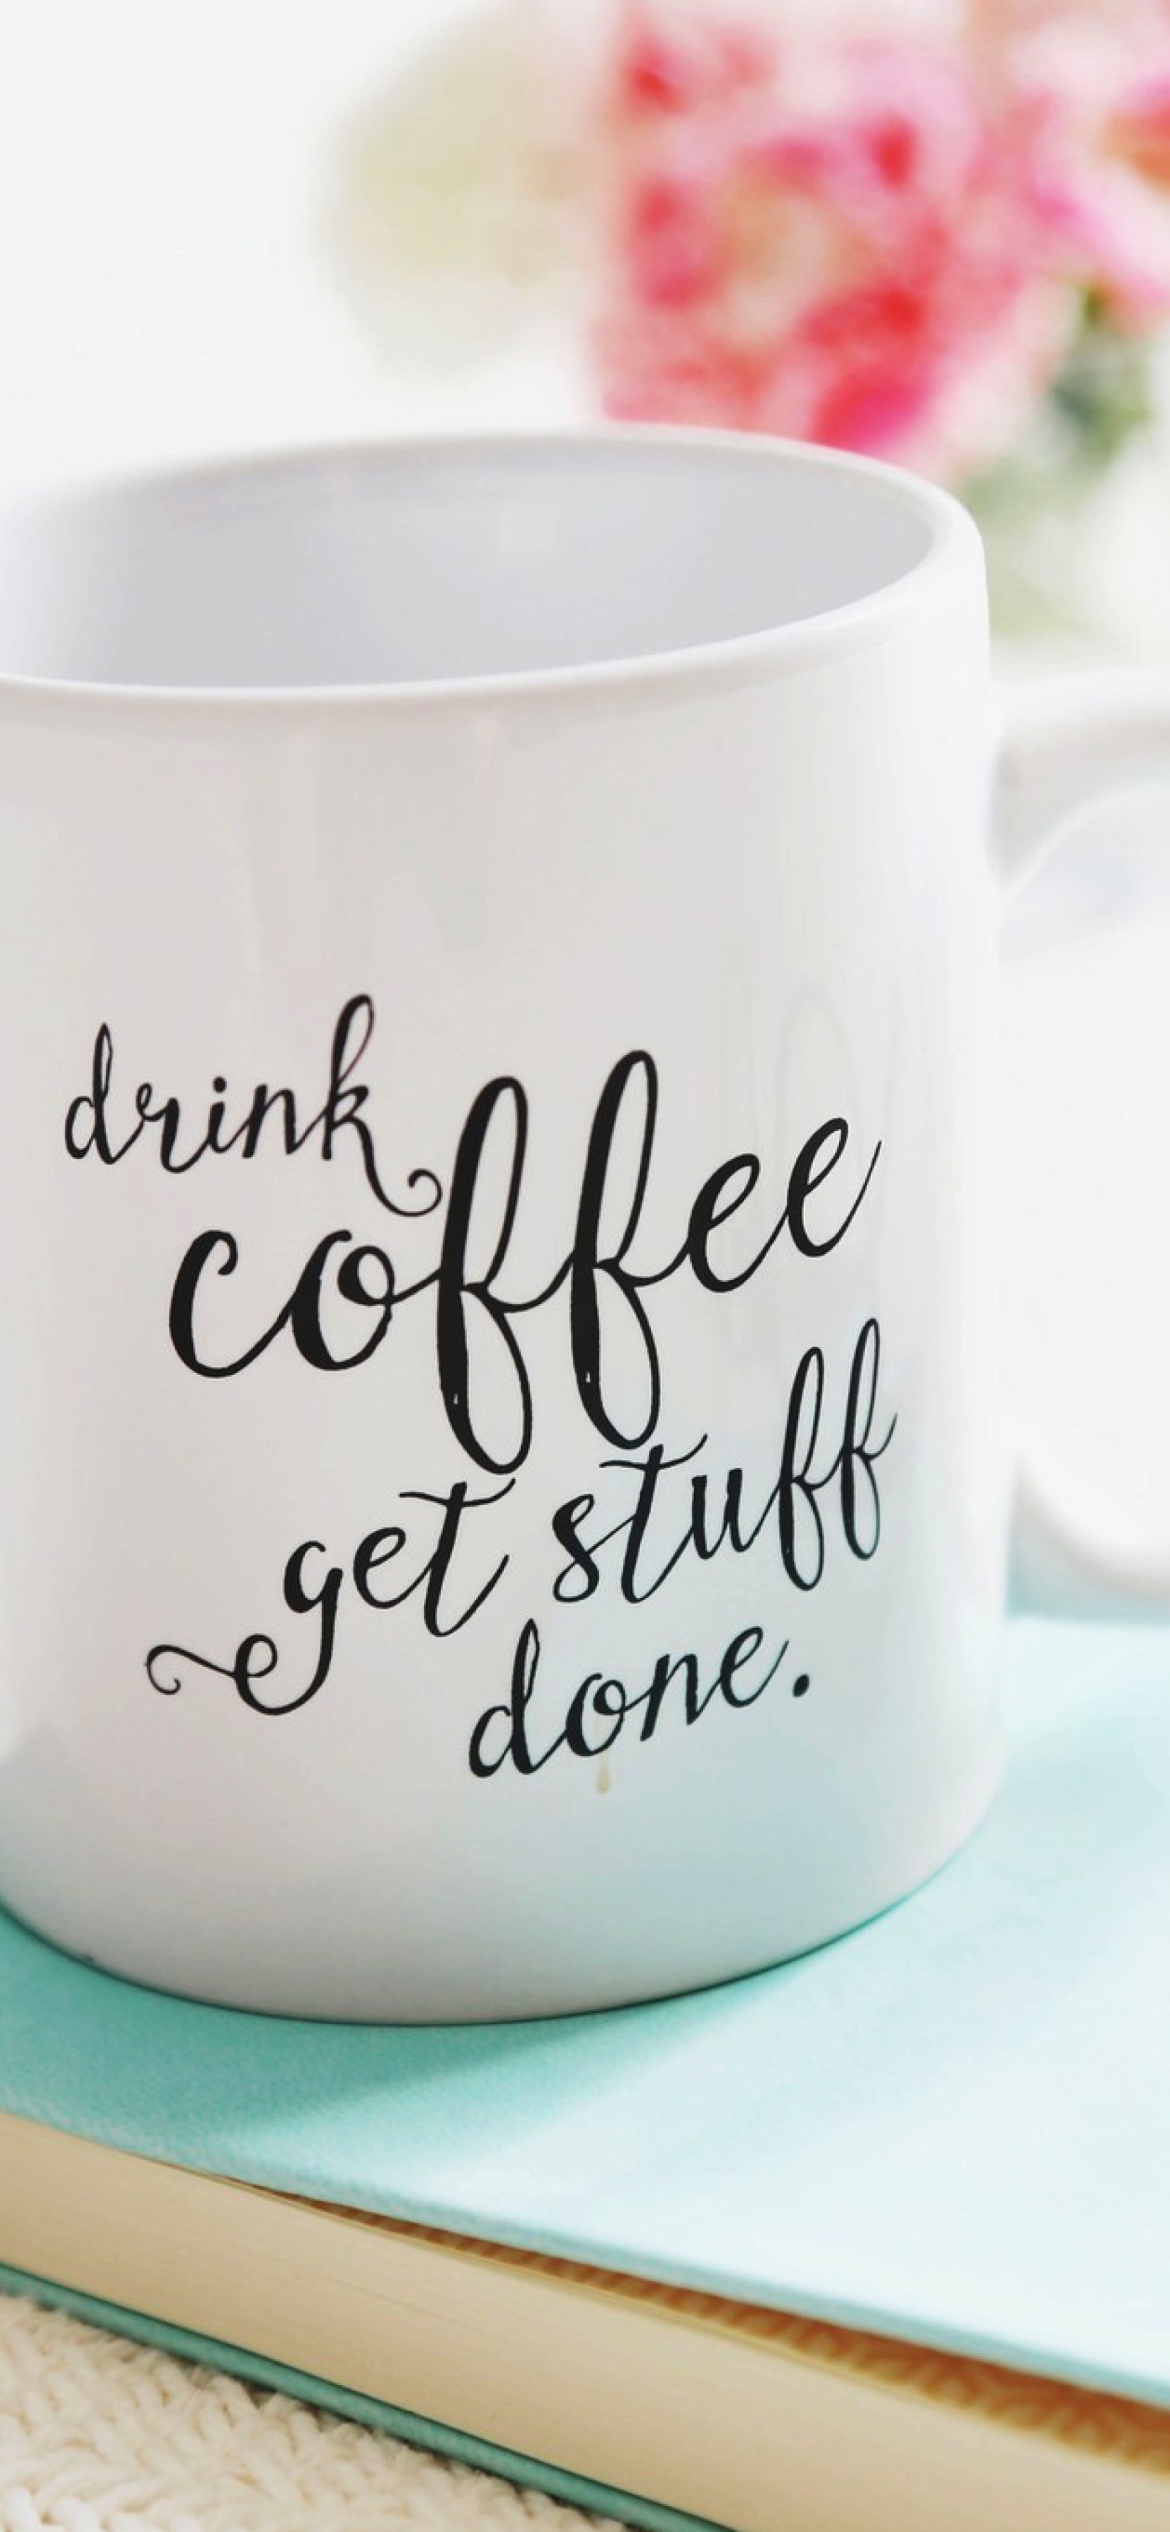 Das Drink Coffee Quote Wallpaper 1170x2532